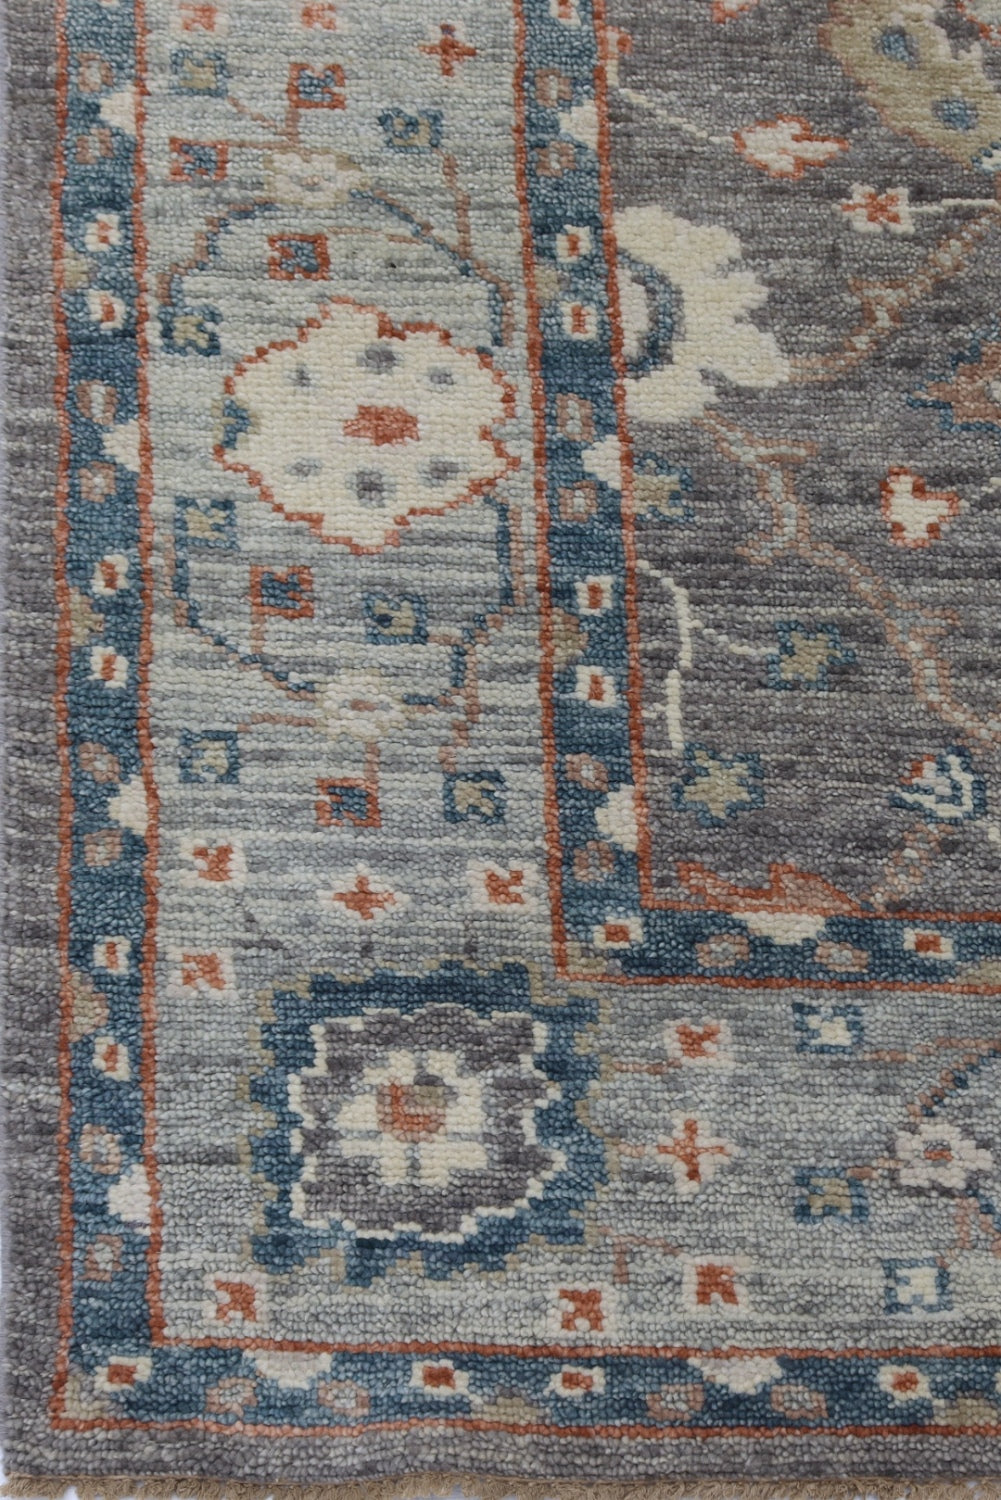 Sultanabad 3 Handwoven Traditional Rug, J71672